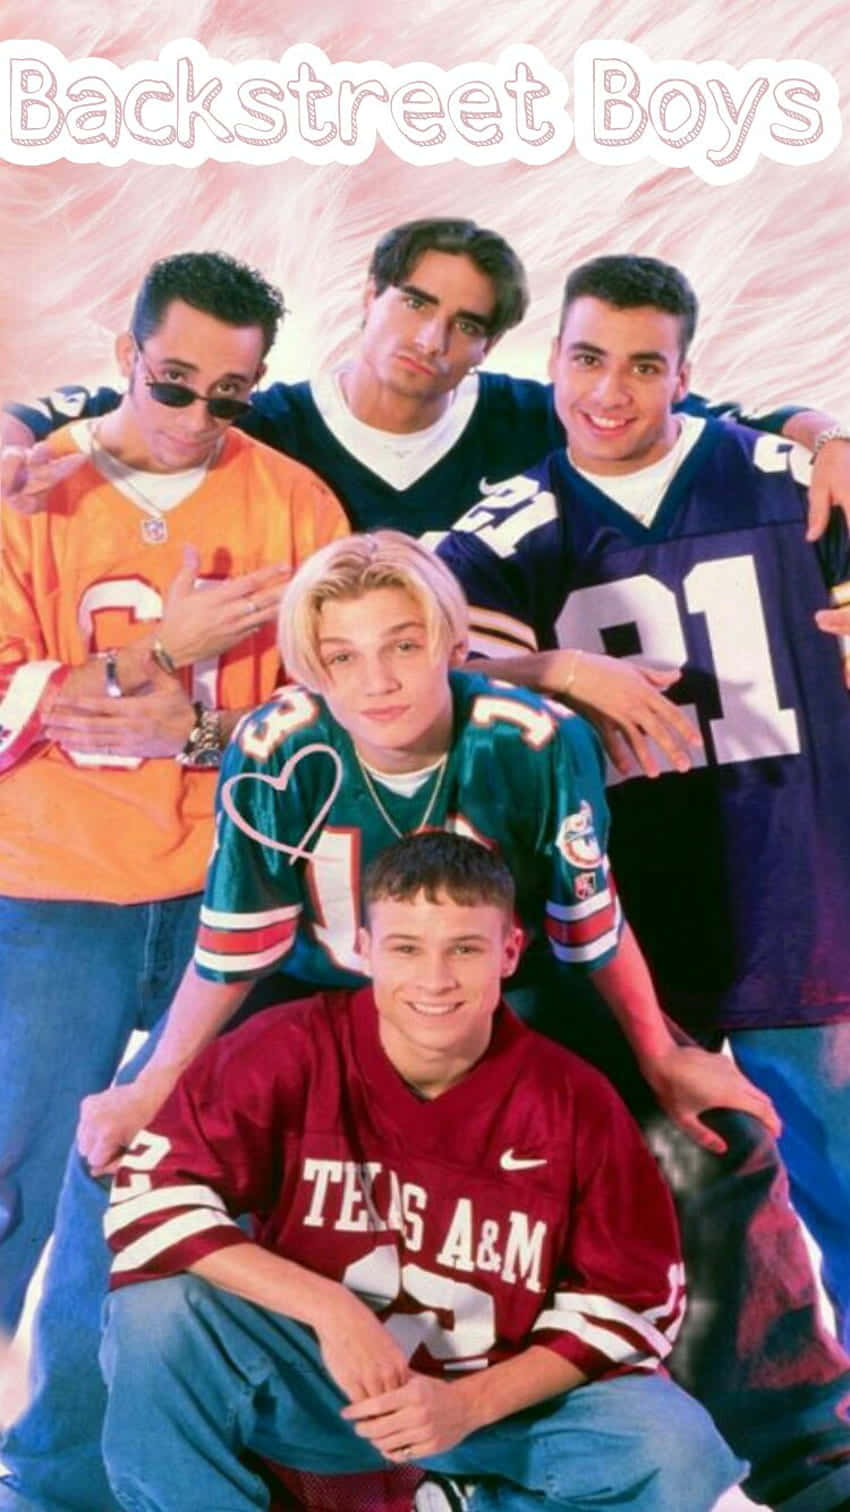 Backstreet Boys - A Poster With A Group Of Young Men